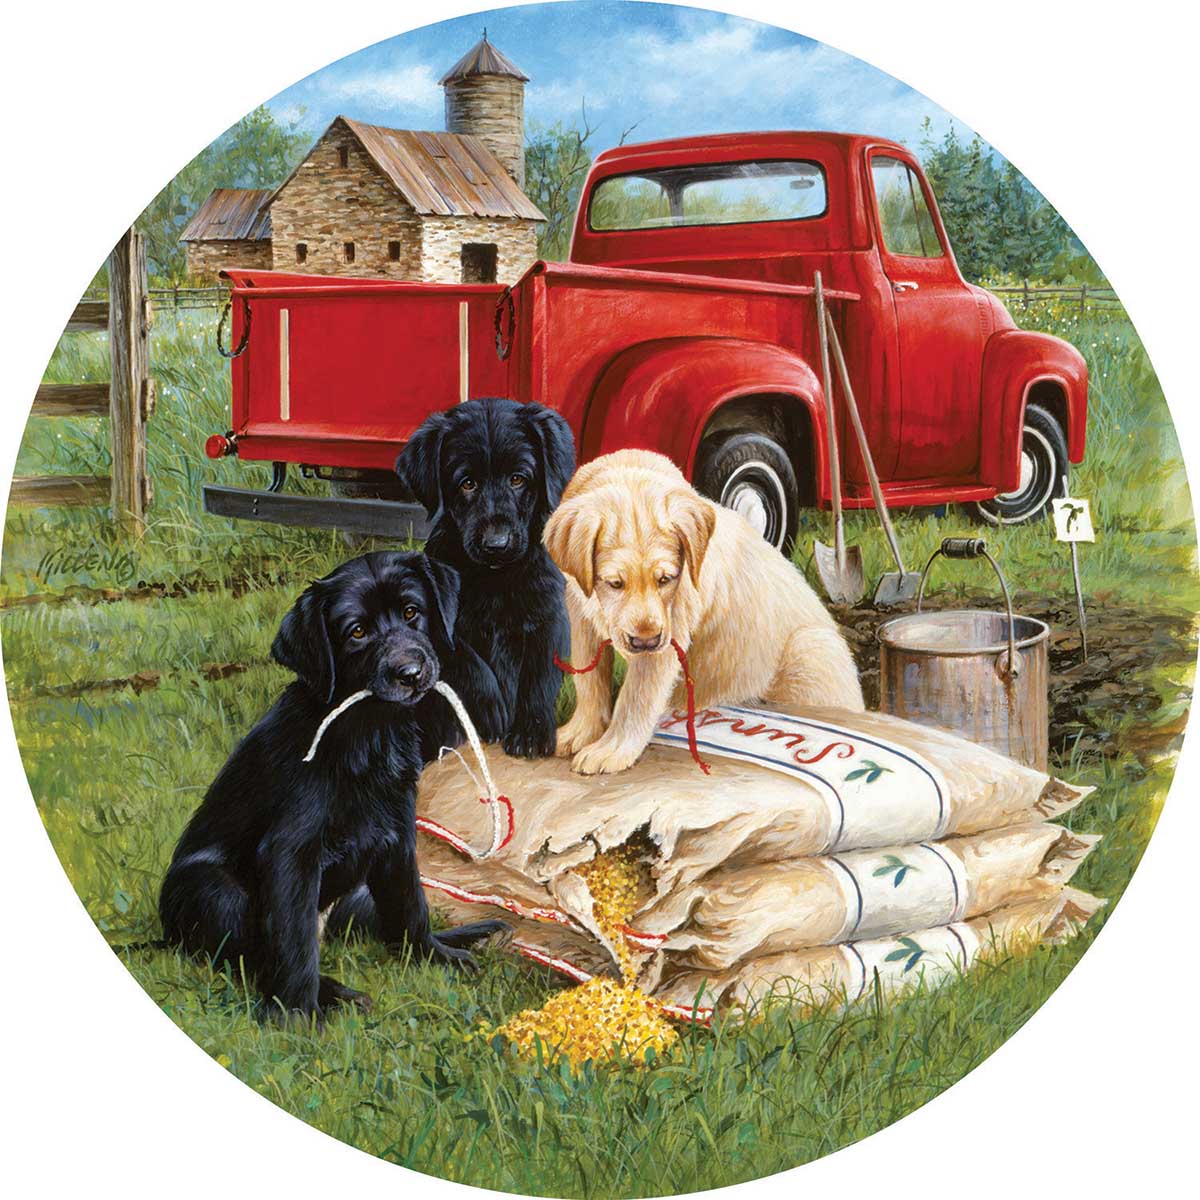 SunsOut Puzzle - #73441 Seeds of Mischief - 500pc Jigsaw Puzzle 